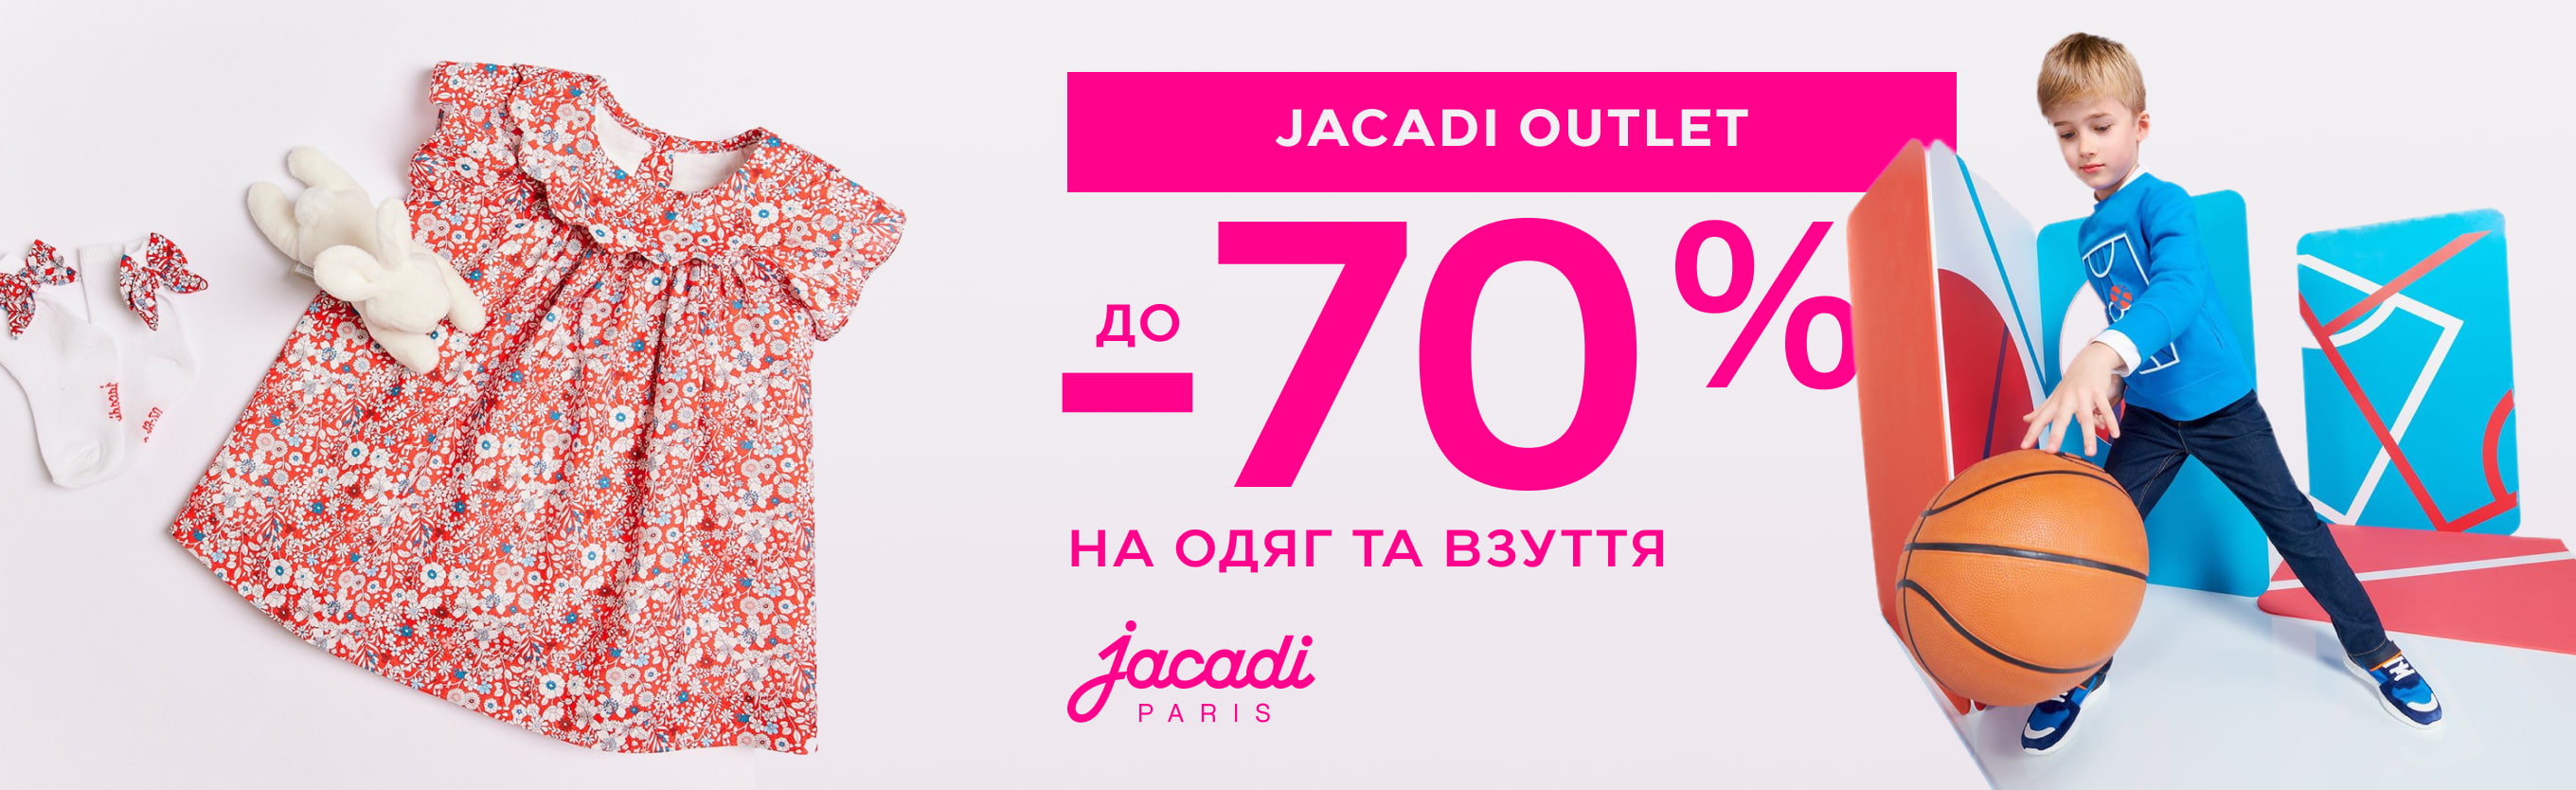 Outlet Jacadi